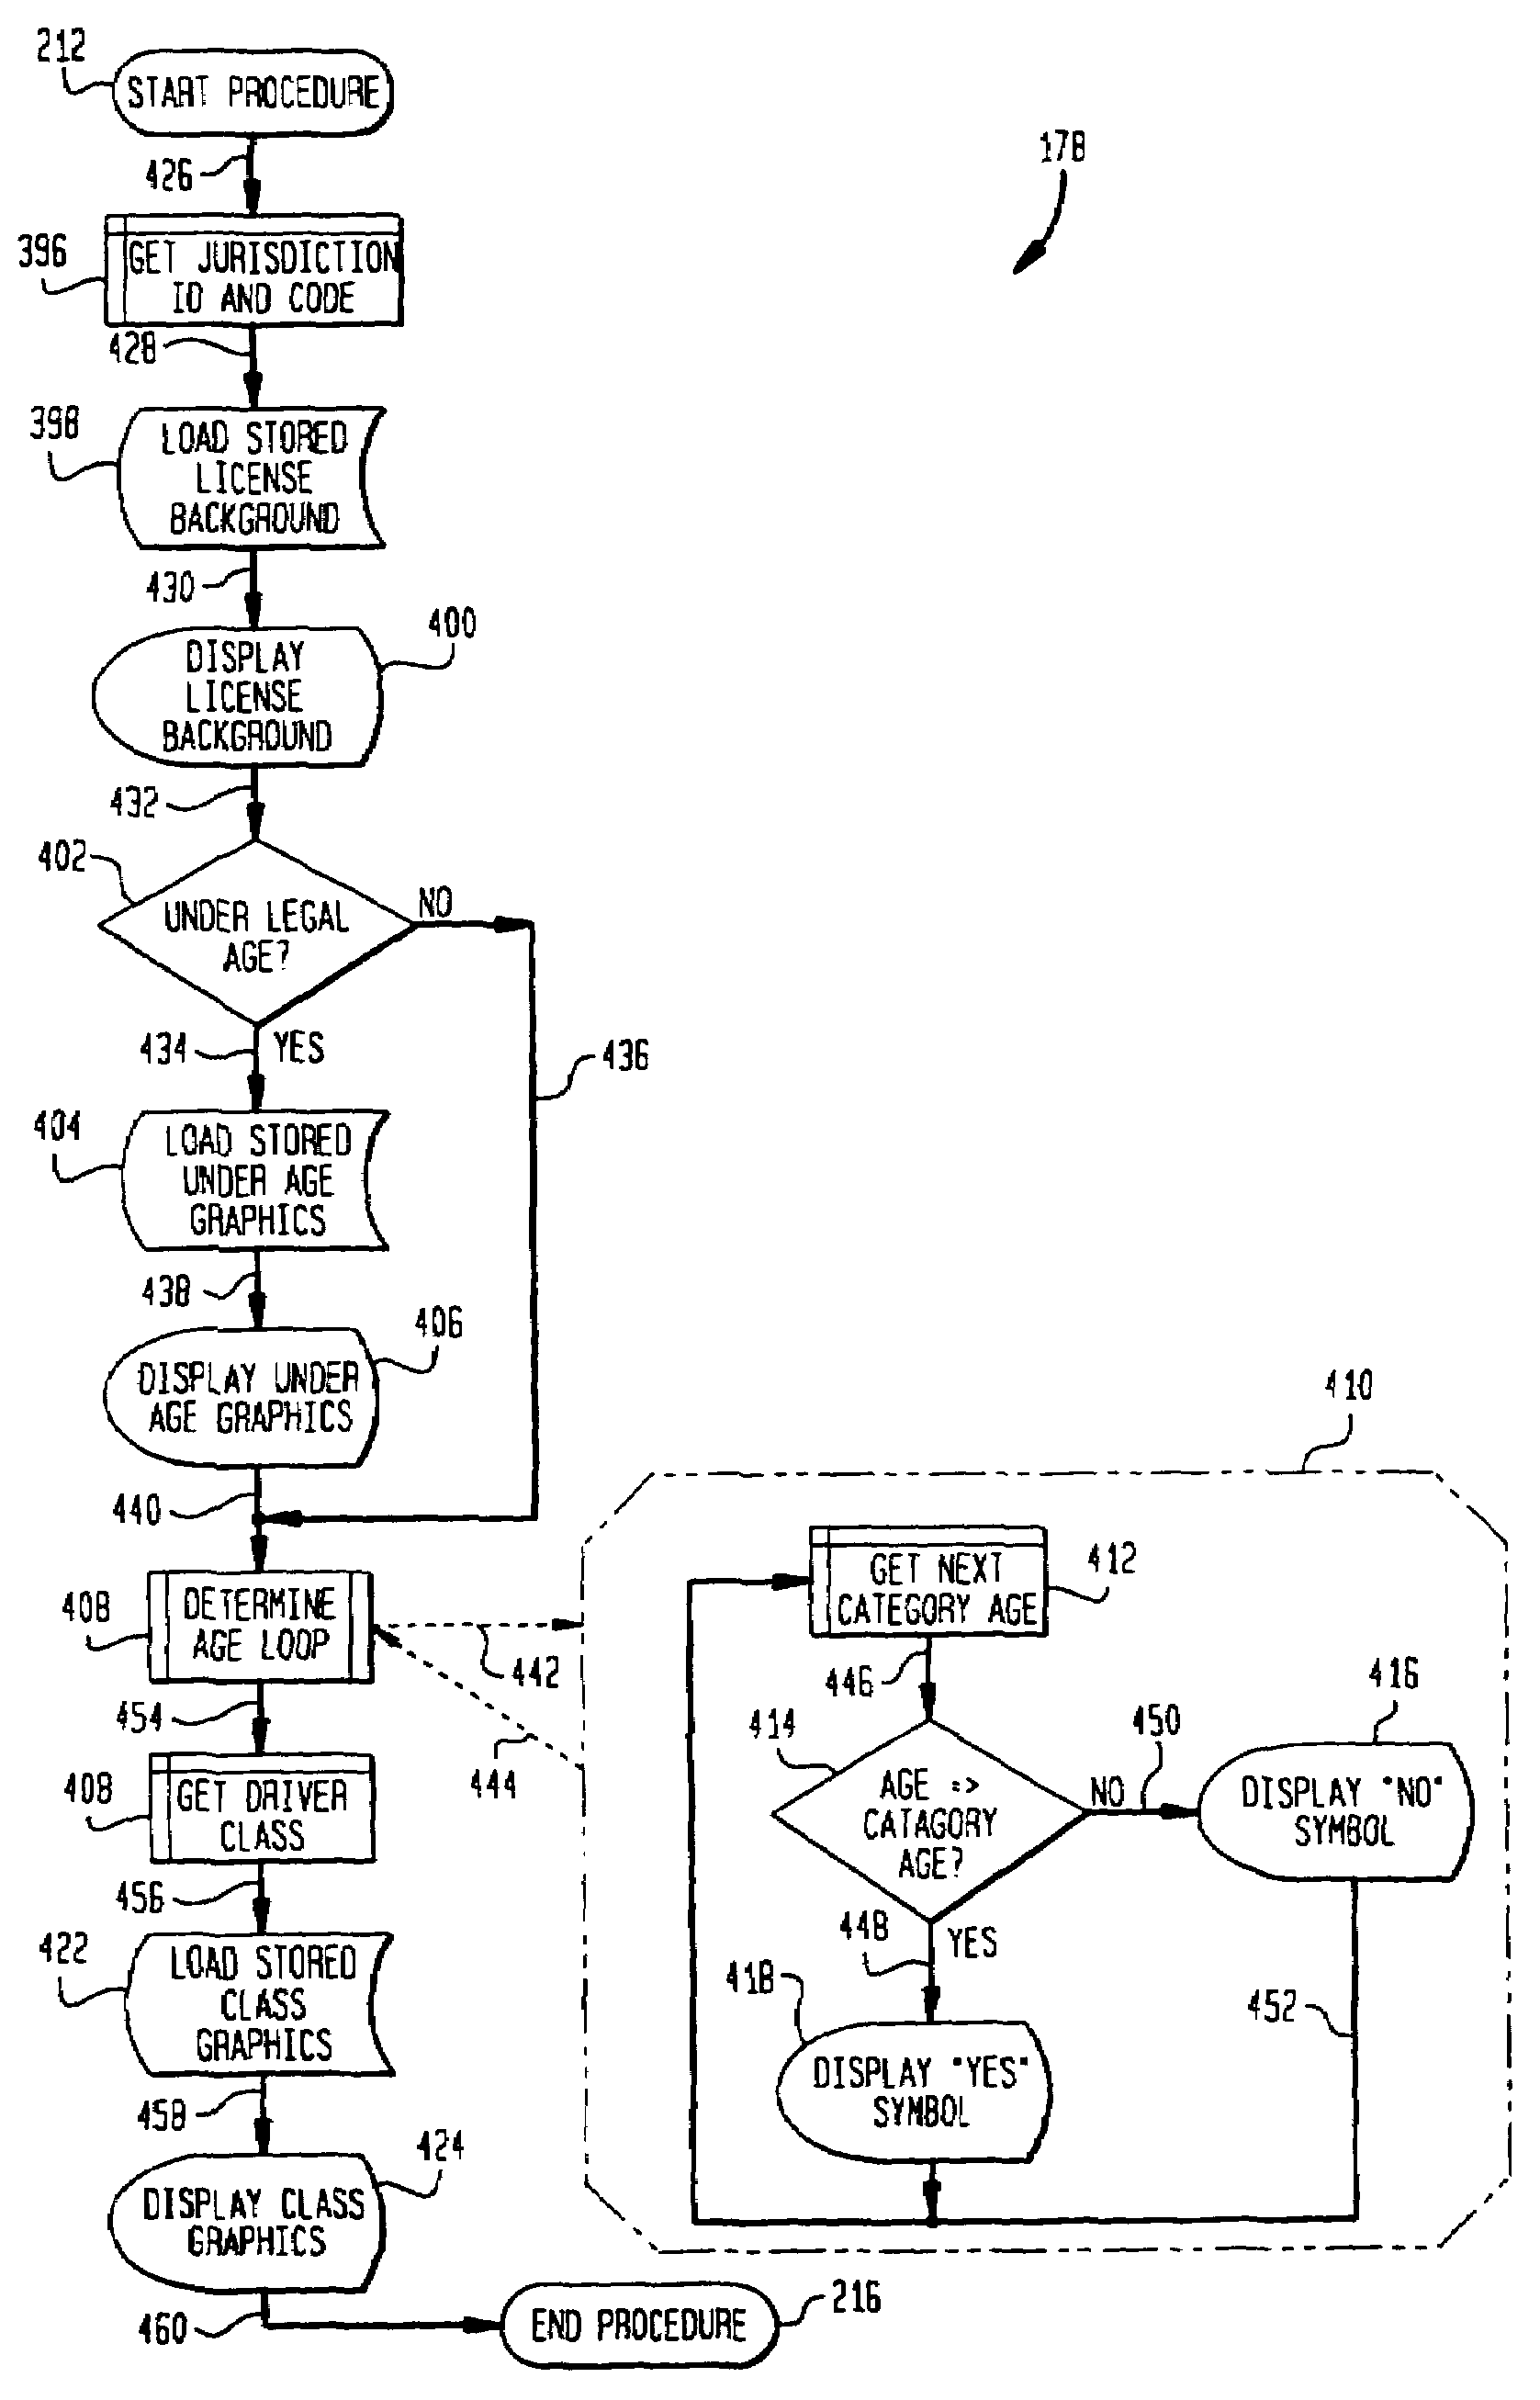 Authentication system for identification documents